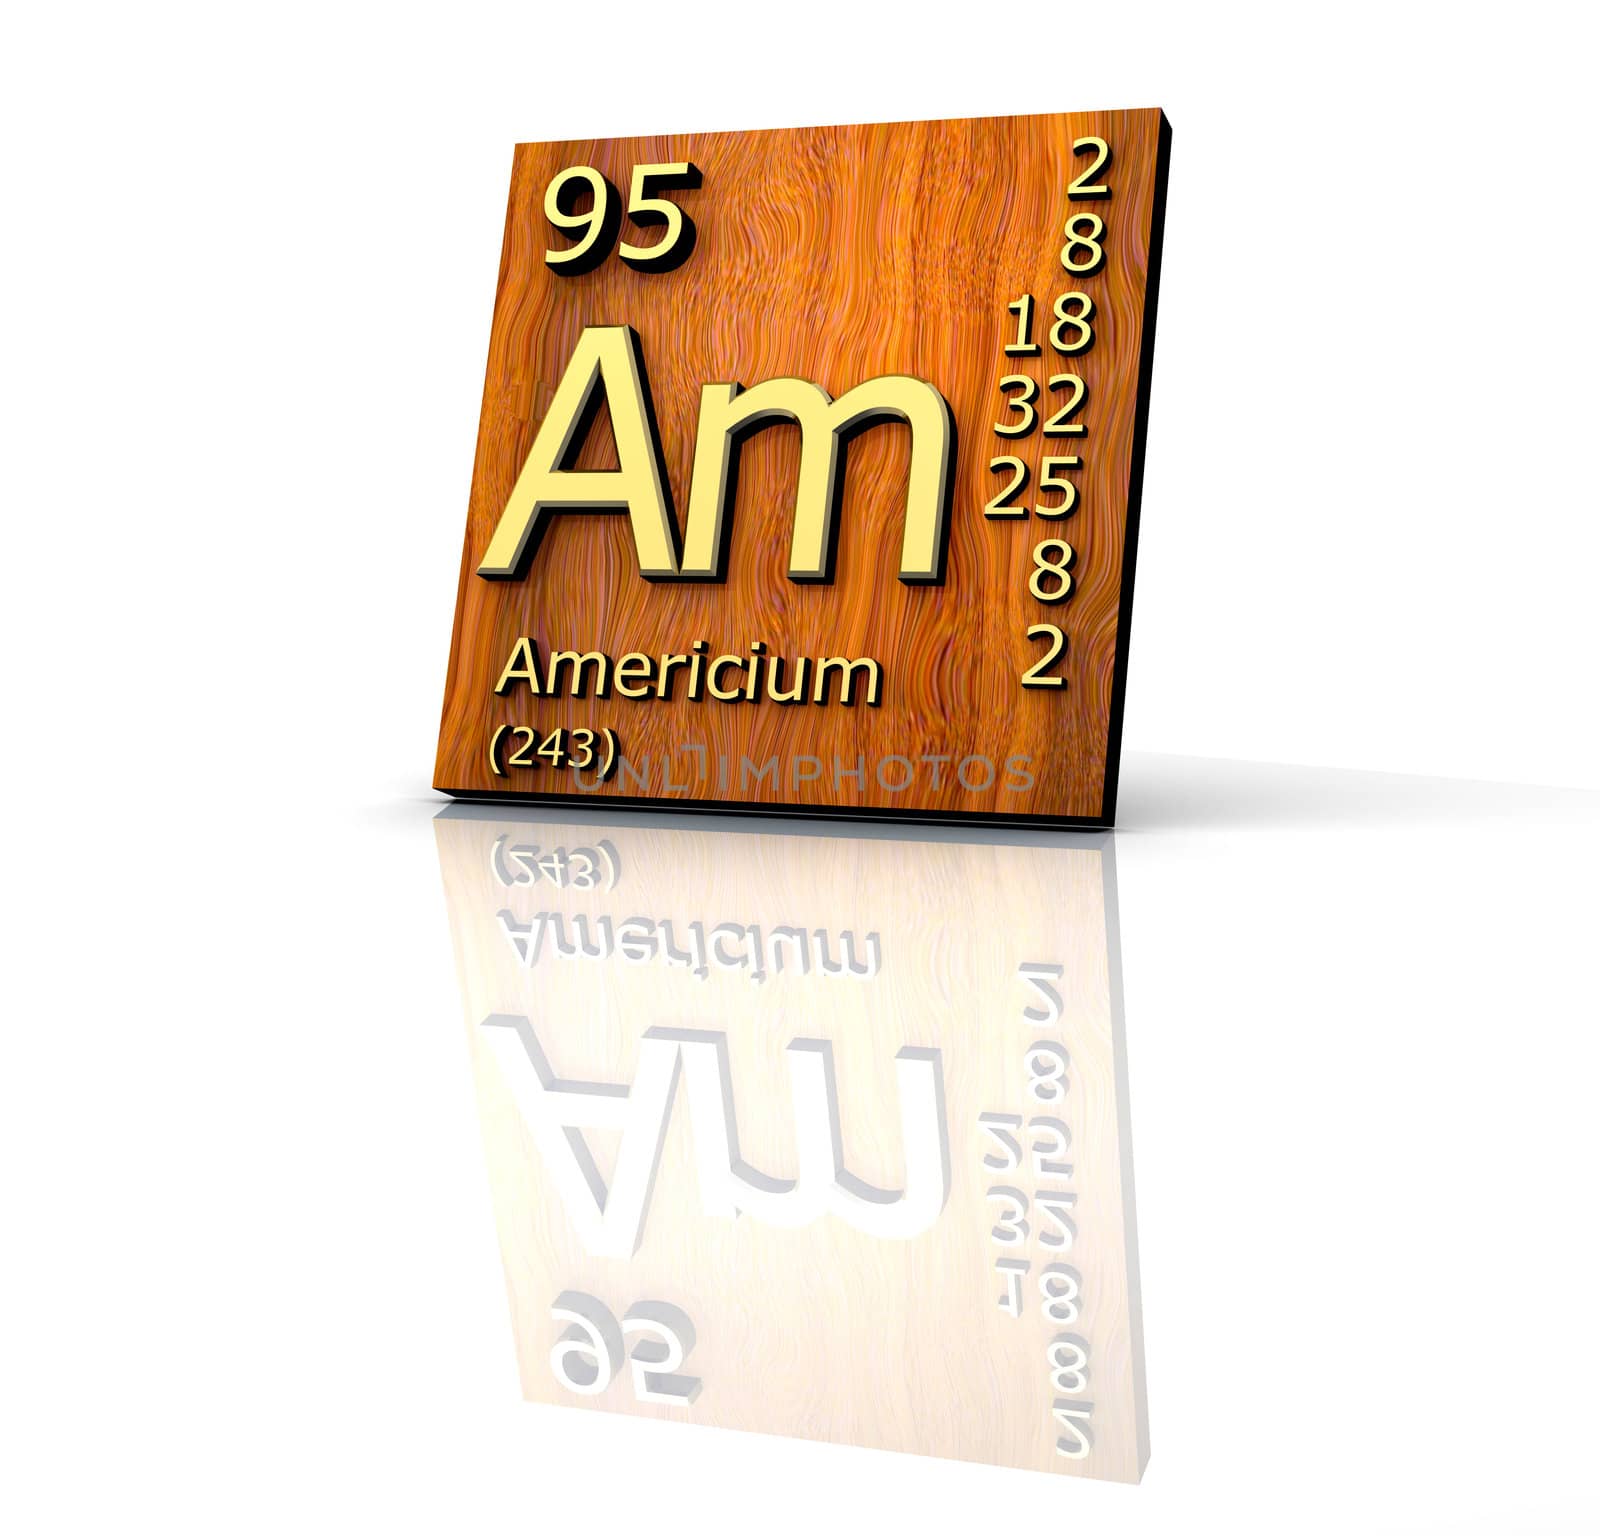 Americium form Periodic Table of Elements - wood board - 3d made